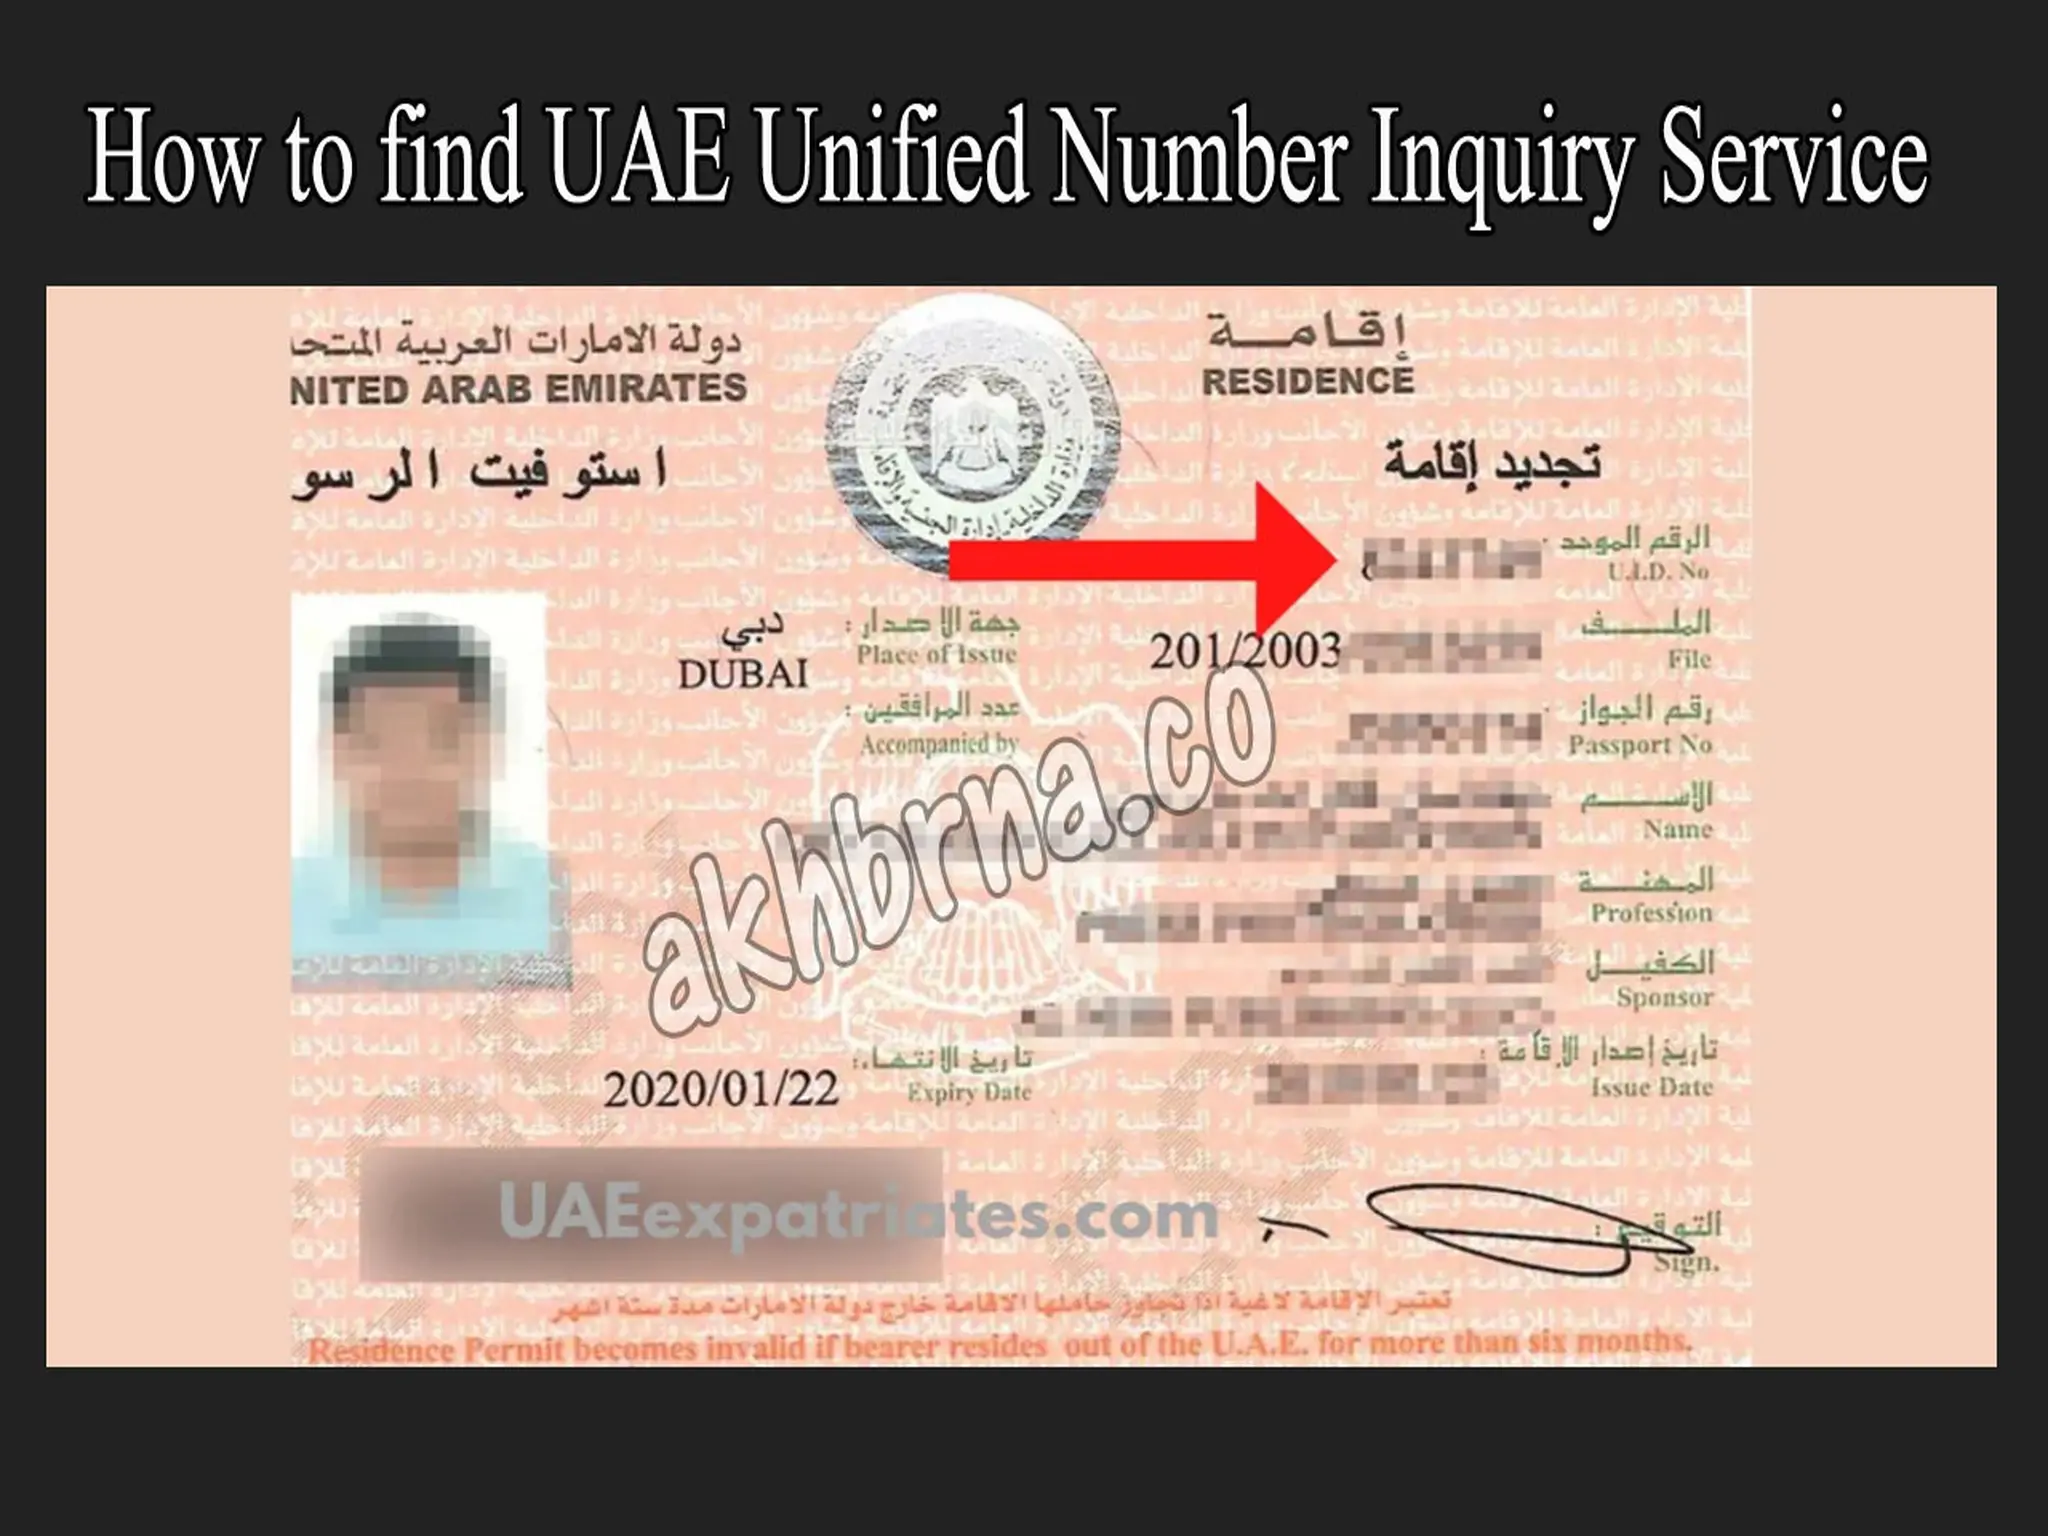 How to find UAE visa number and Unified Number Inquiry Service by online?